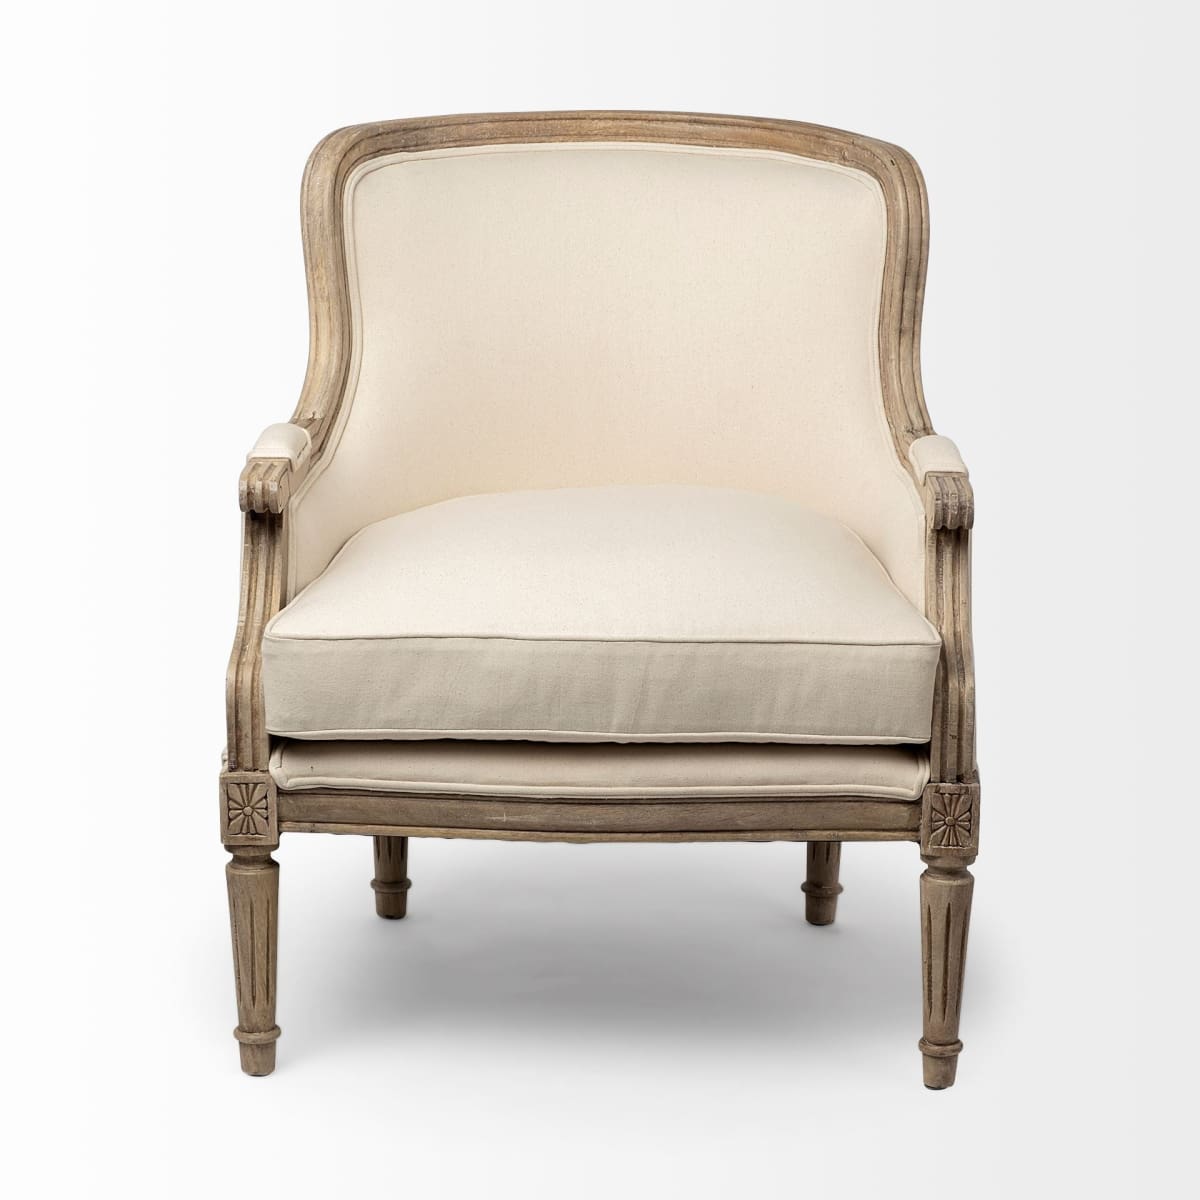 Elizabeth Accent Chair Cream Fabric | Brown Wood - accent-chairs